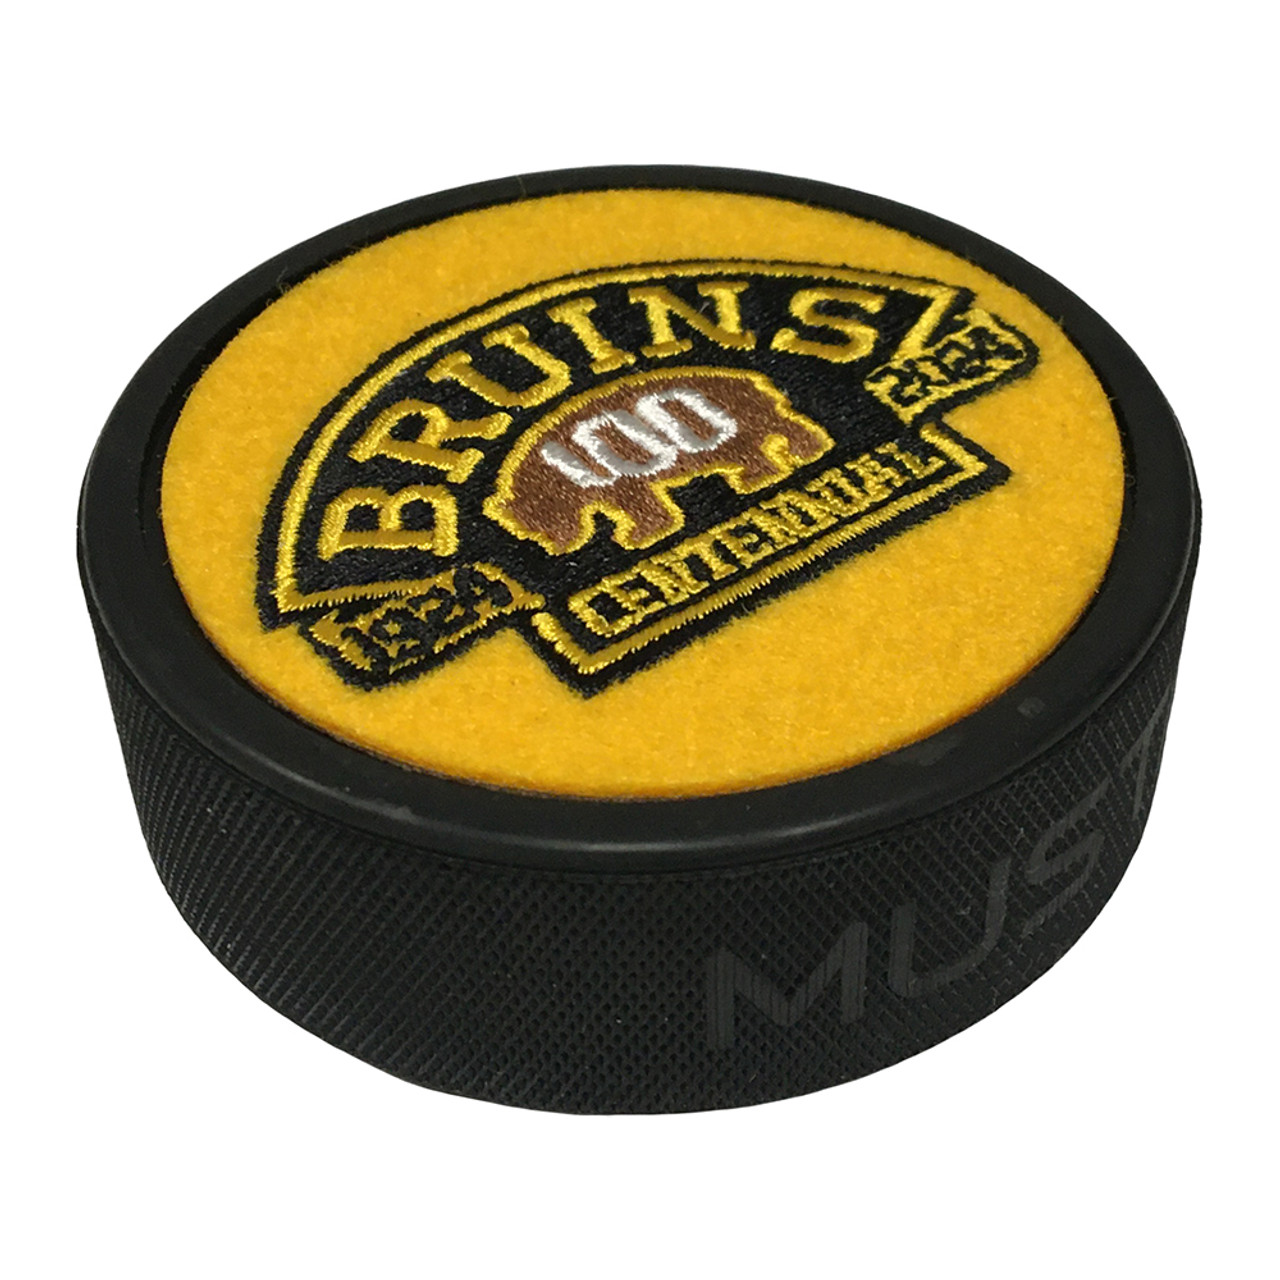 Boston Bruins Primary Team Logo Patch - Maker of Jacket